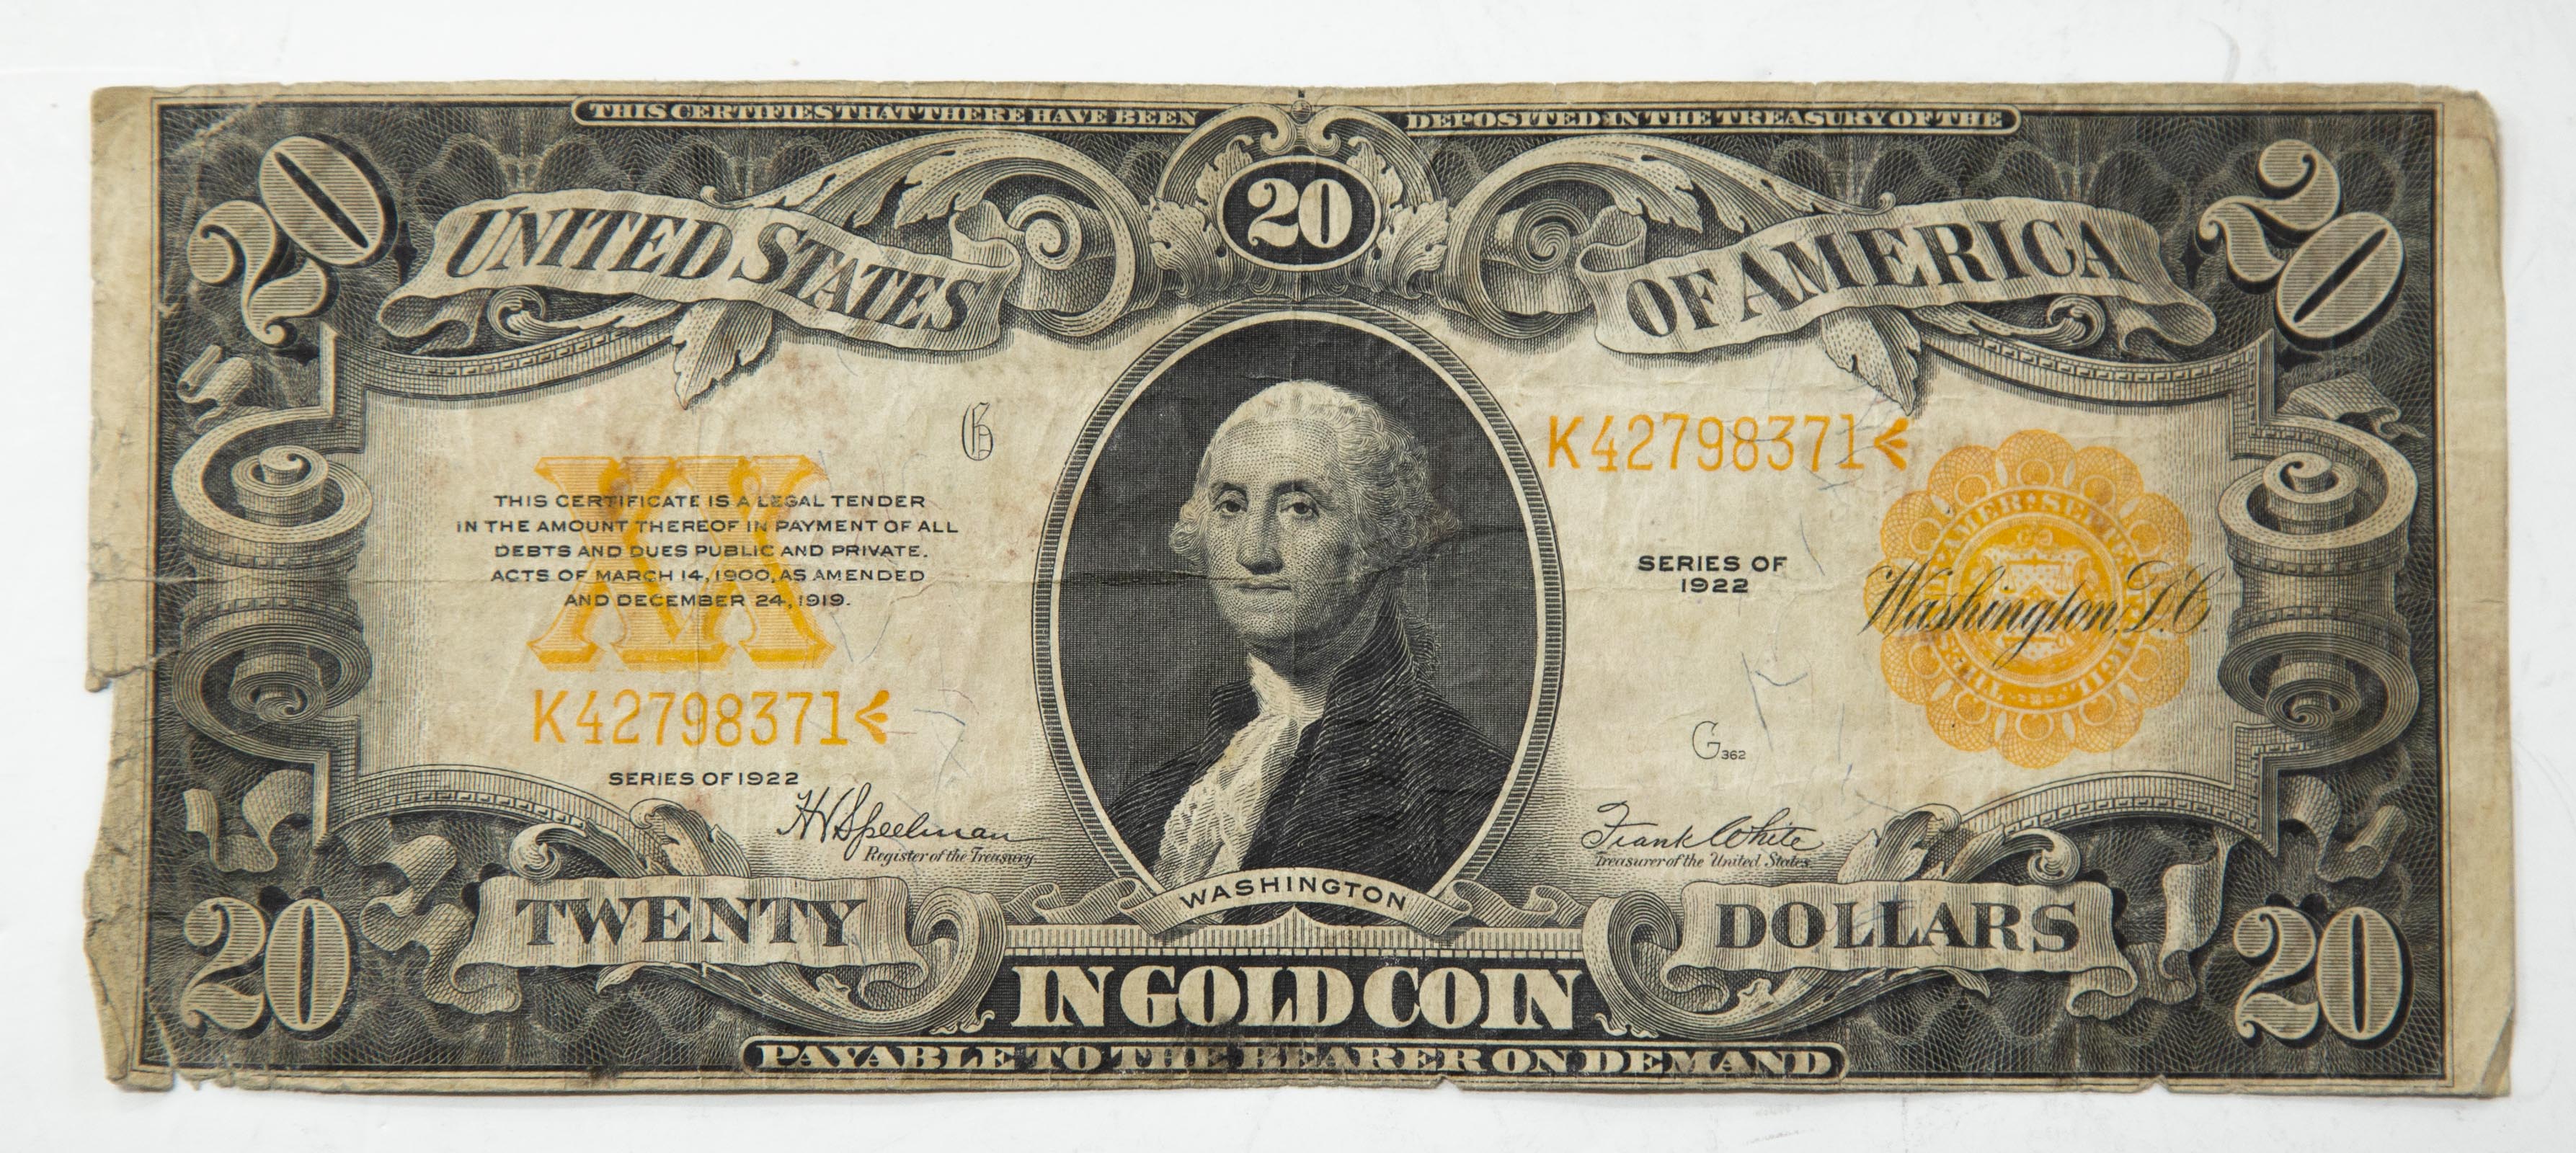 1922 20 GOLD CERTIFICATE VG with 3376a2